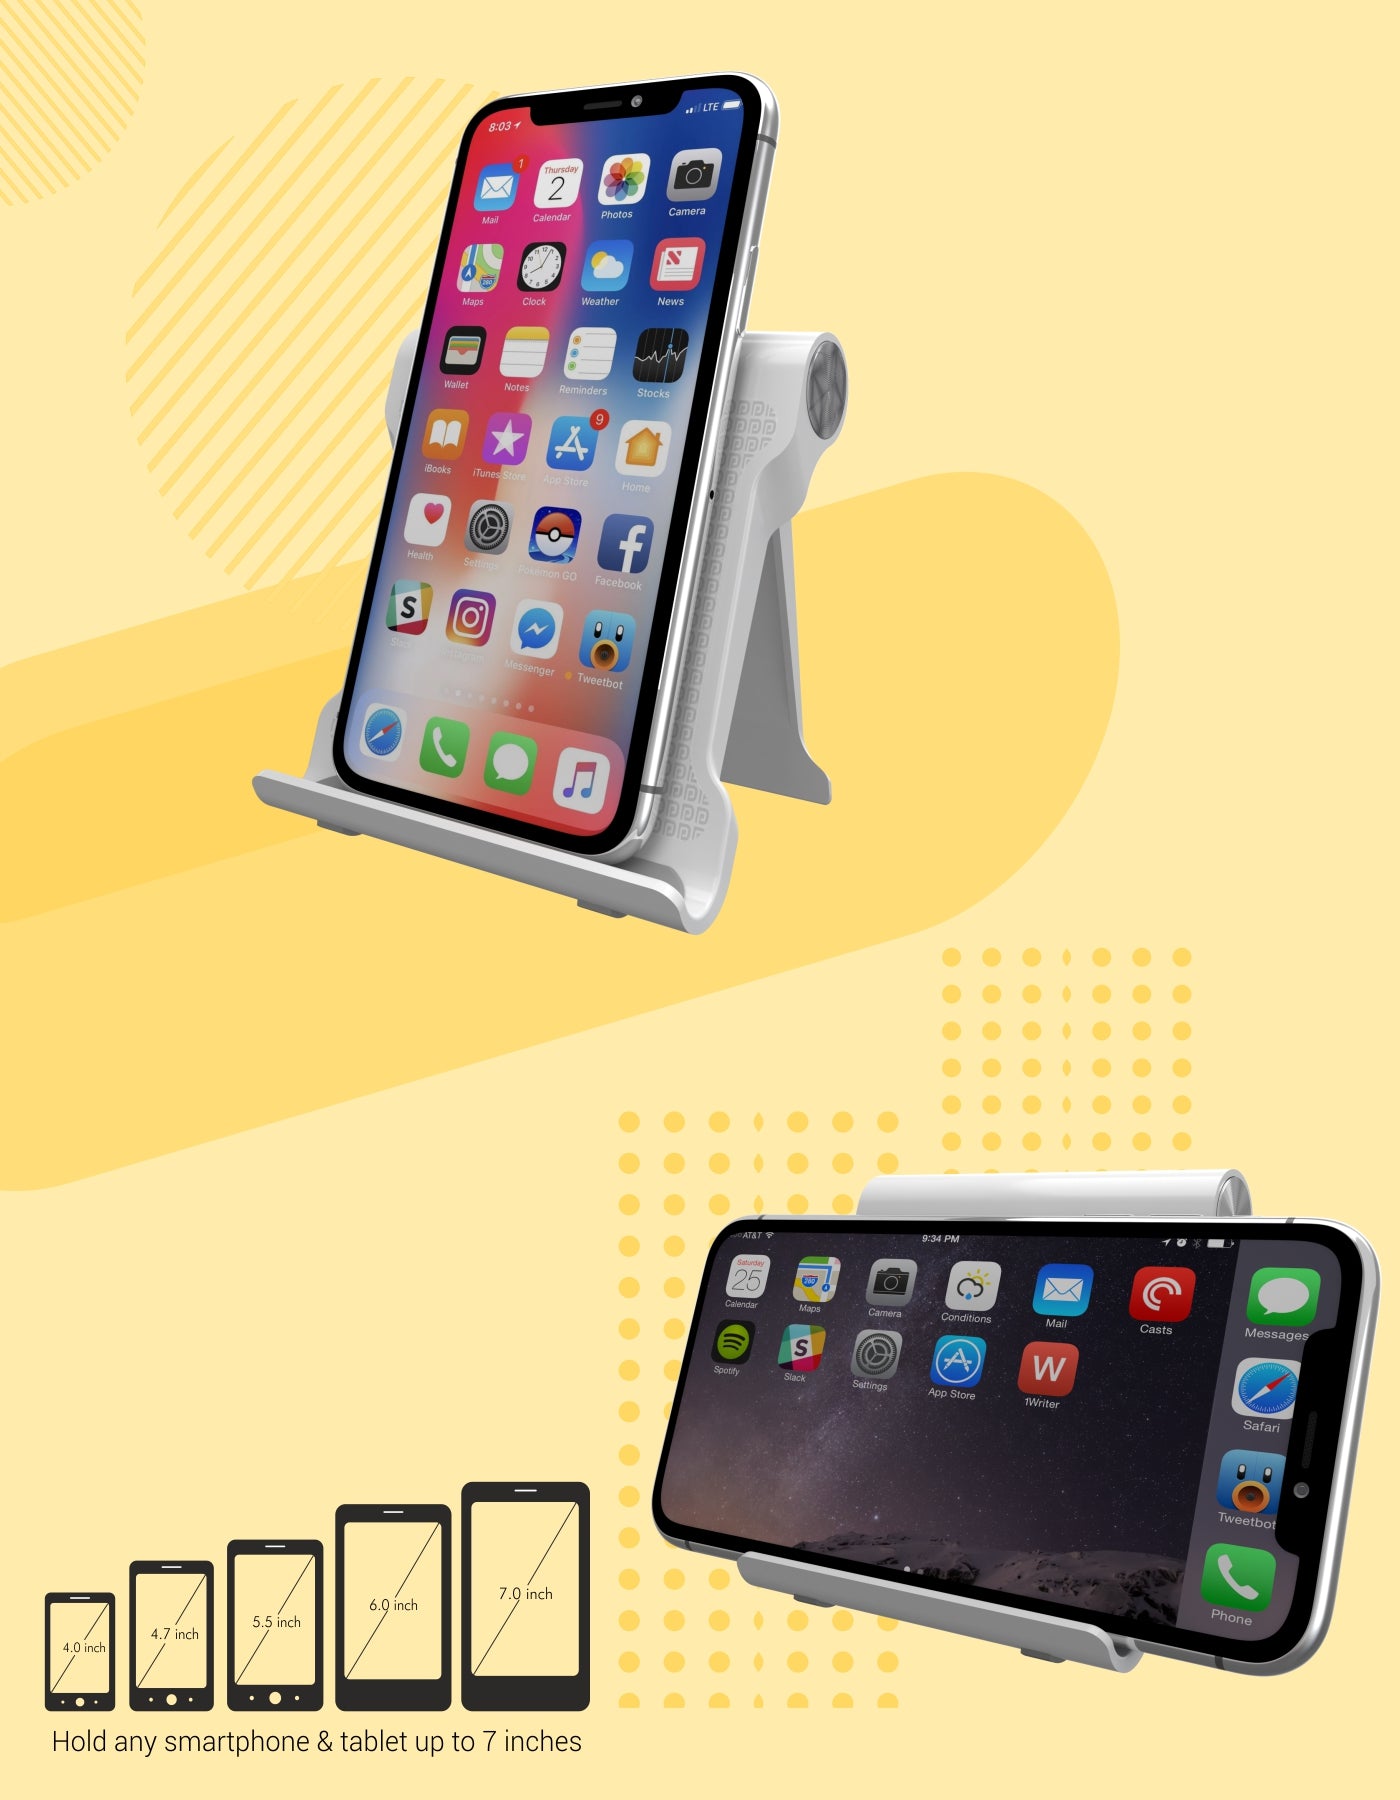 Portronics Modesk 200: Adjustable Mobile Phone Stand Holder suitable for 7 inches smartphone 